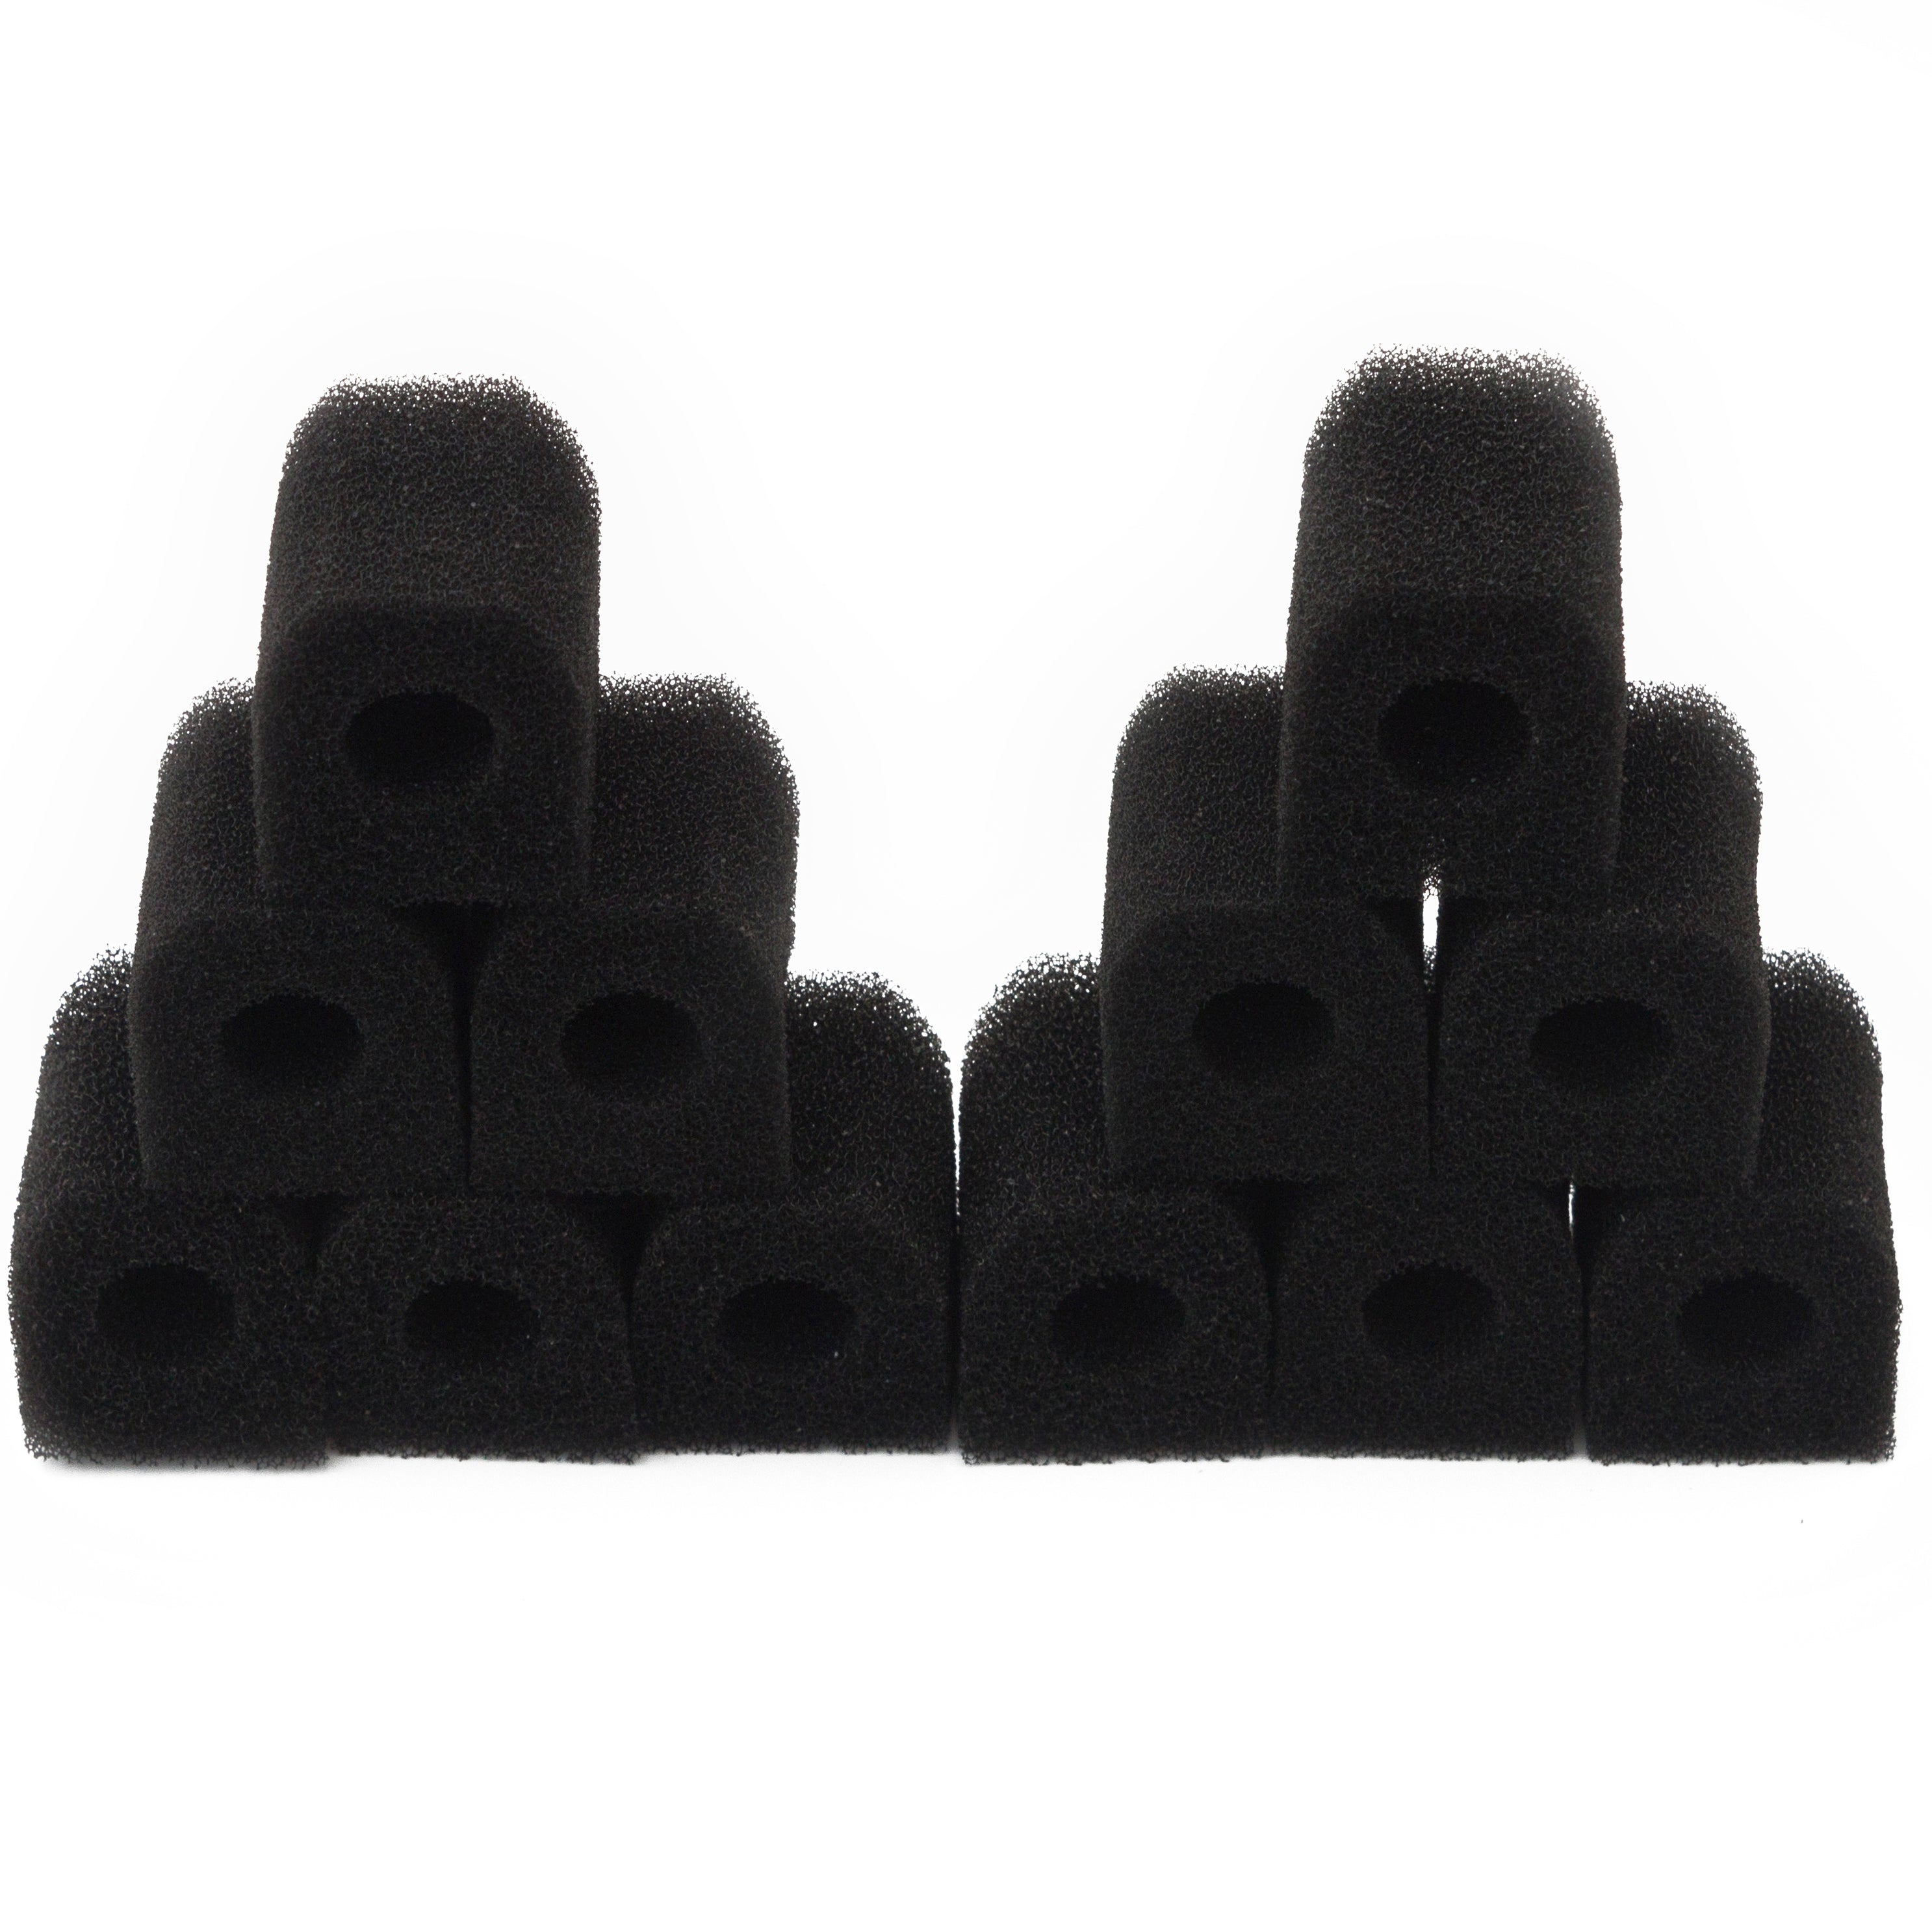 LTWHOME Bio Sponge Fit for Penn Plax Cascade 300 Internal Filter Replacement Cartridges(Pack of 12)